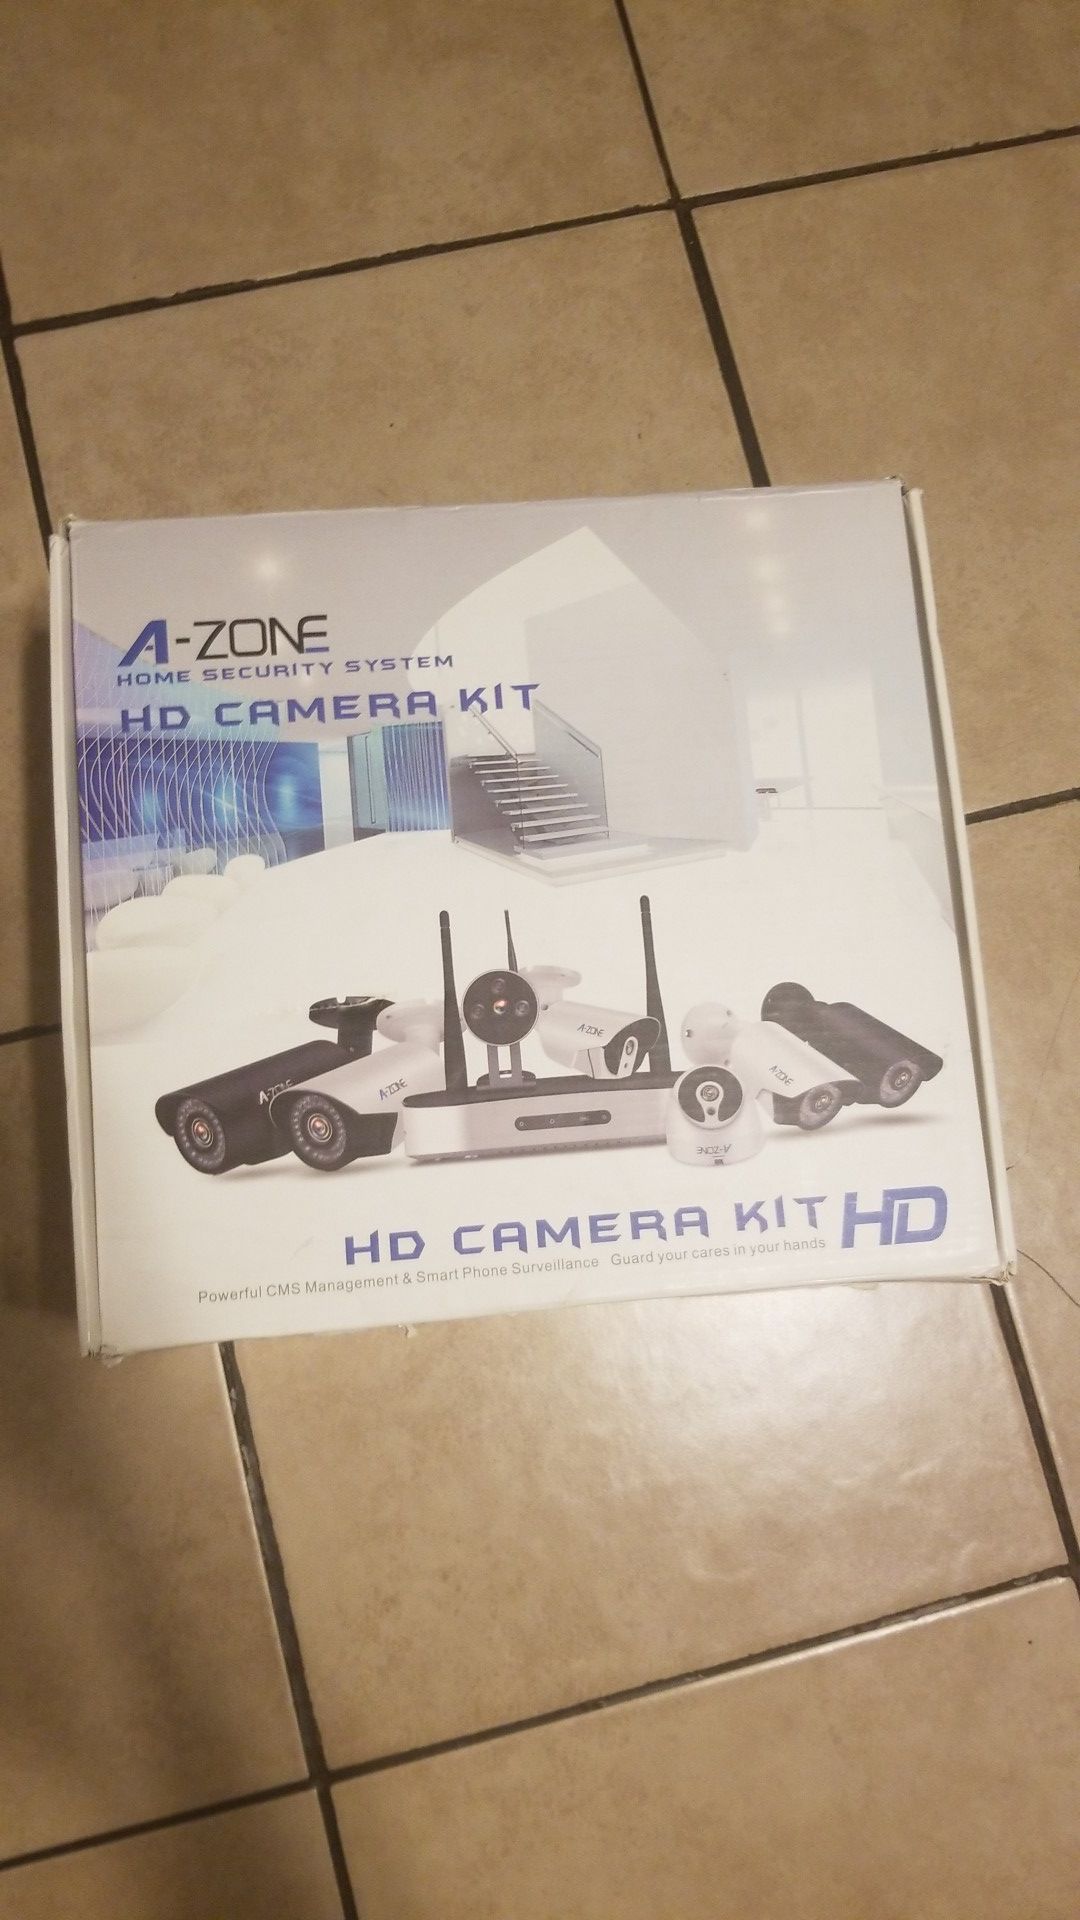 A-ZONE HOME SECURITY SYSTEM